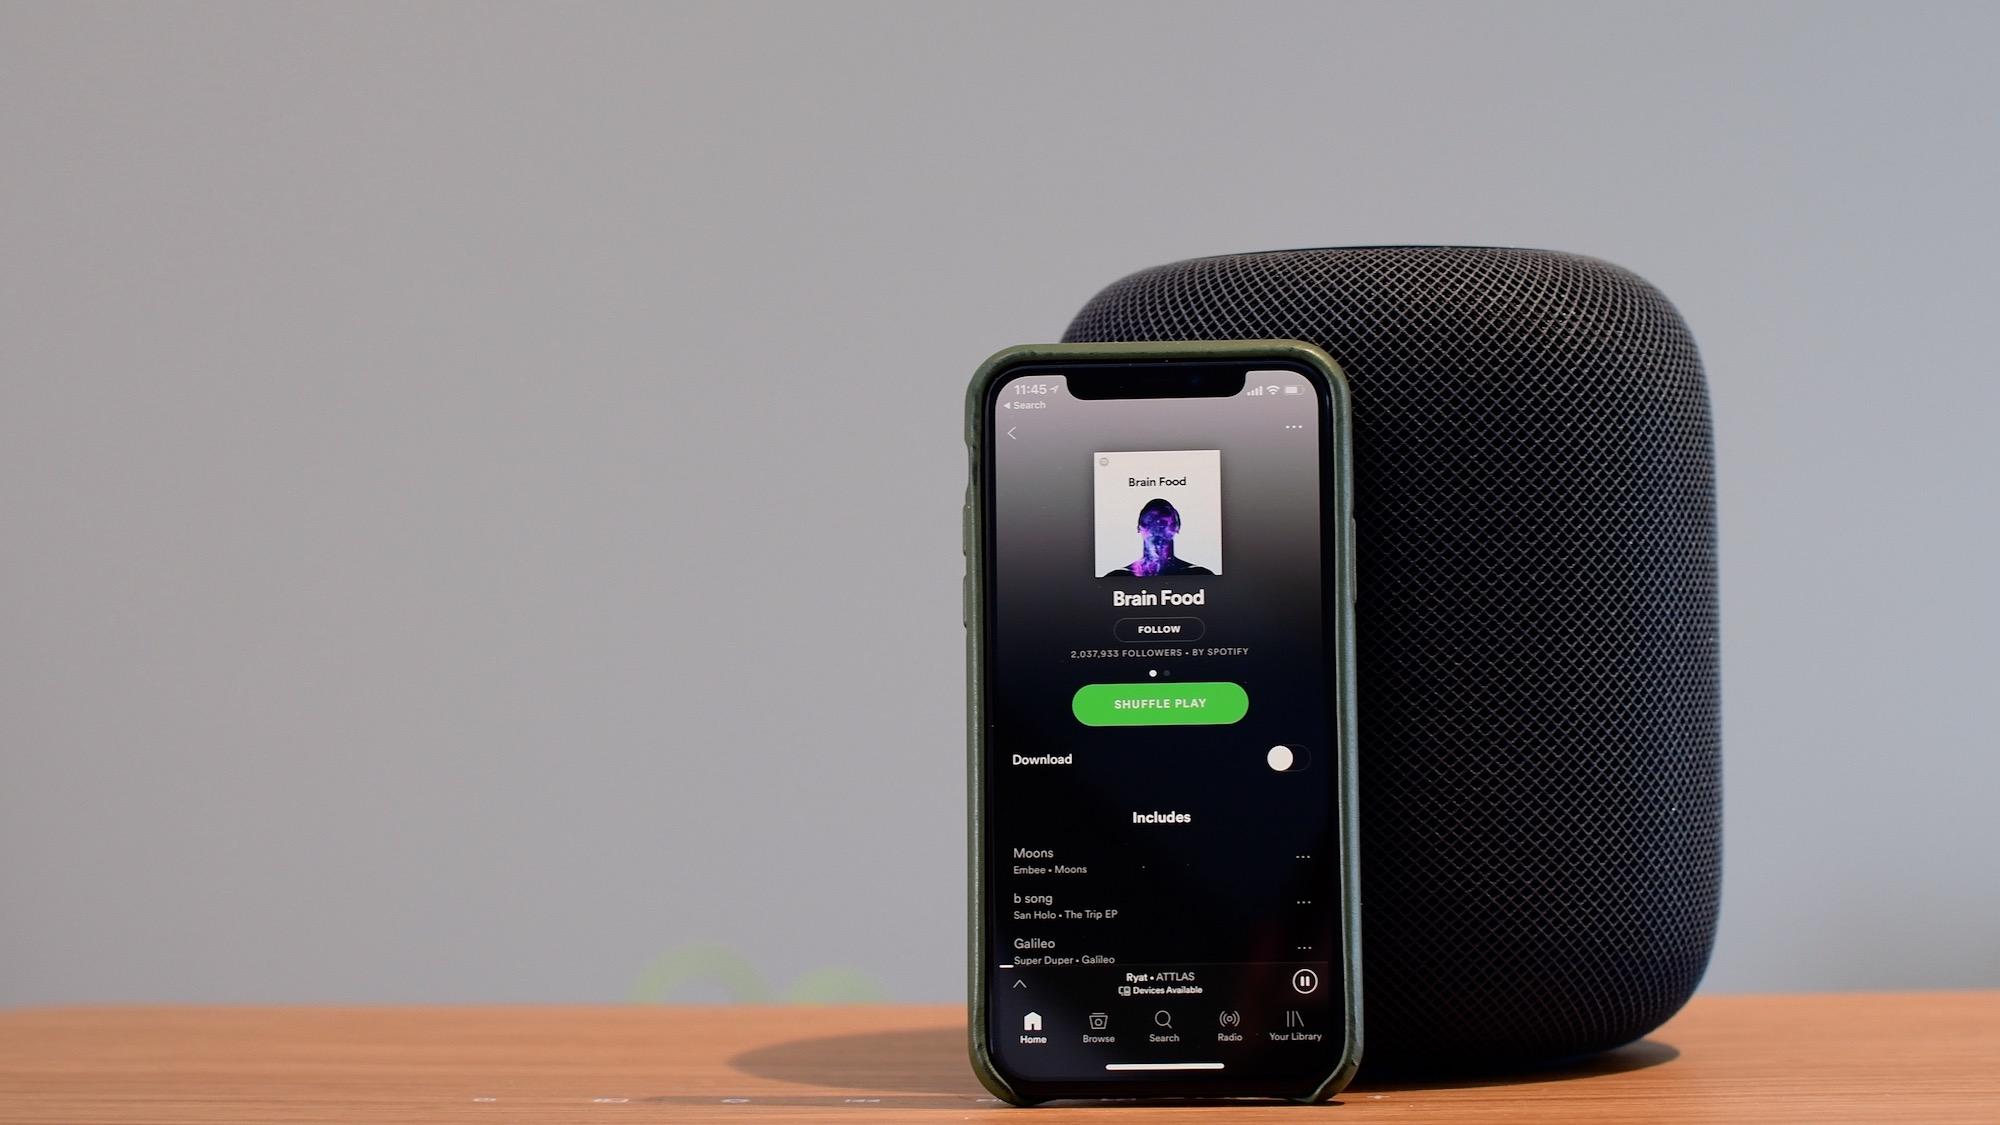 How to play Spotify on your new HomePod